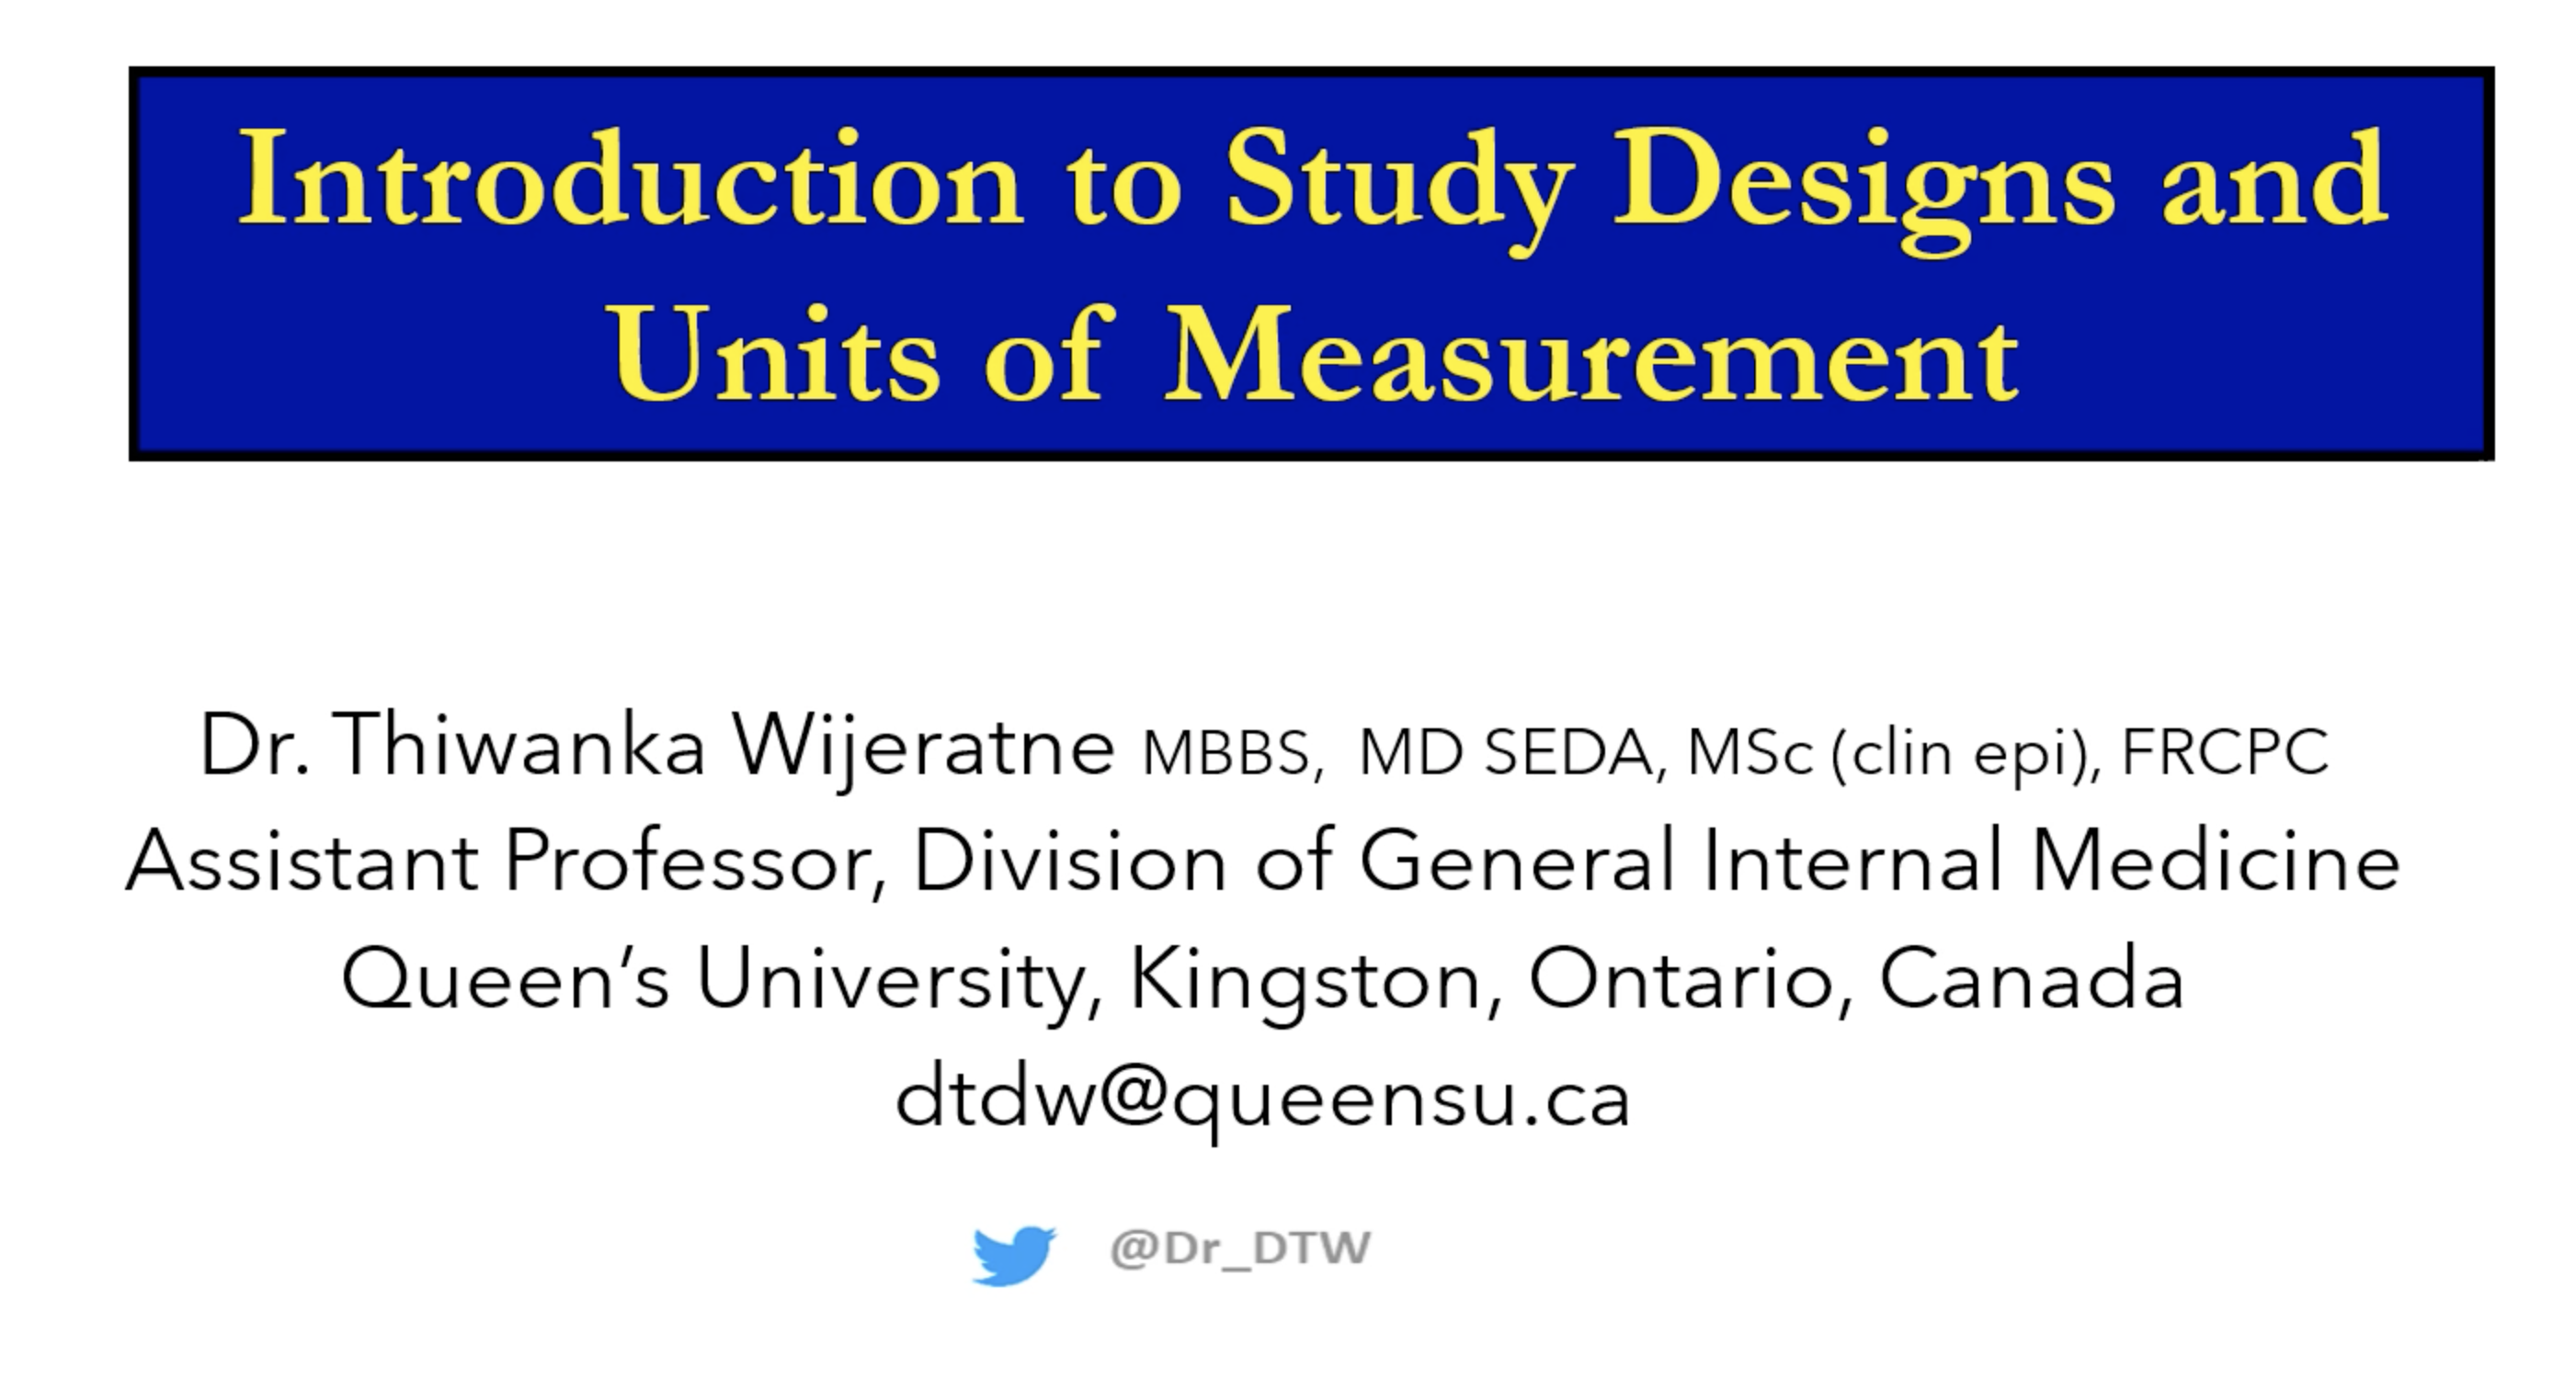 Introduction to Study Designs and Units of Measurement